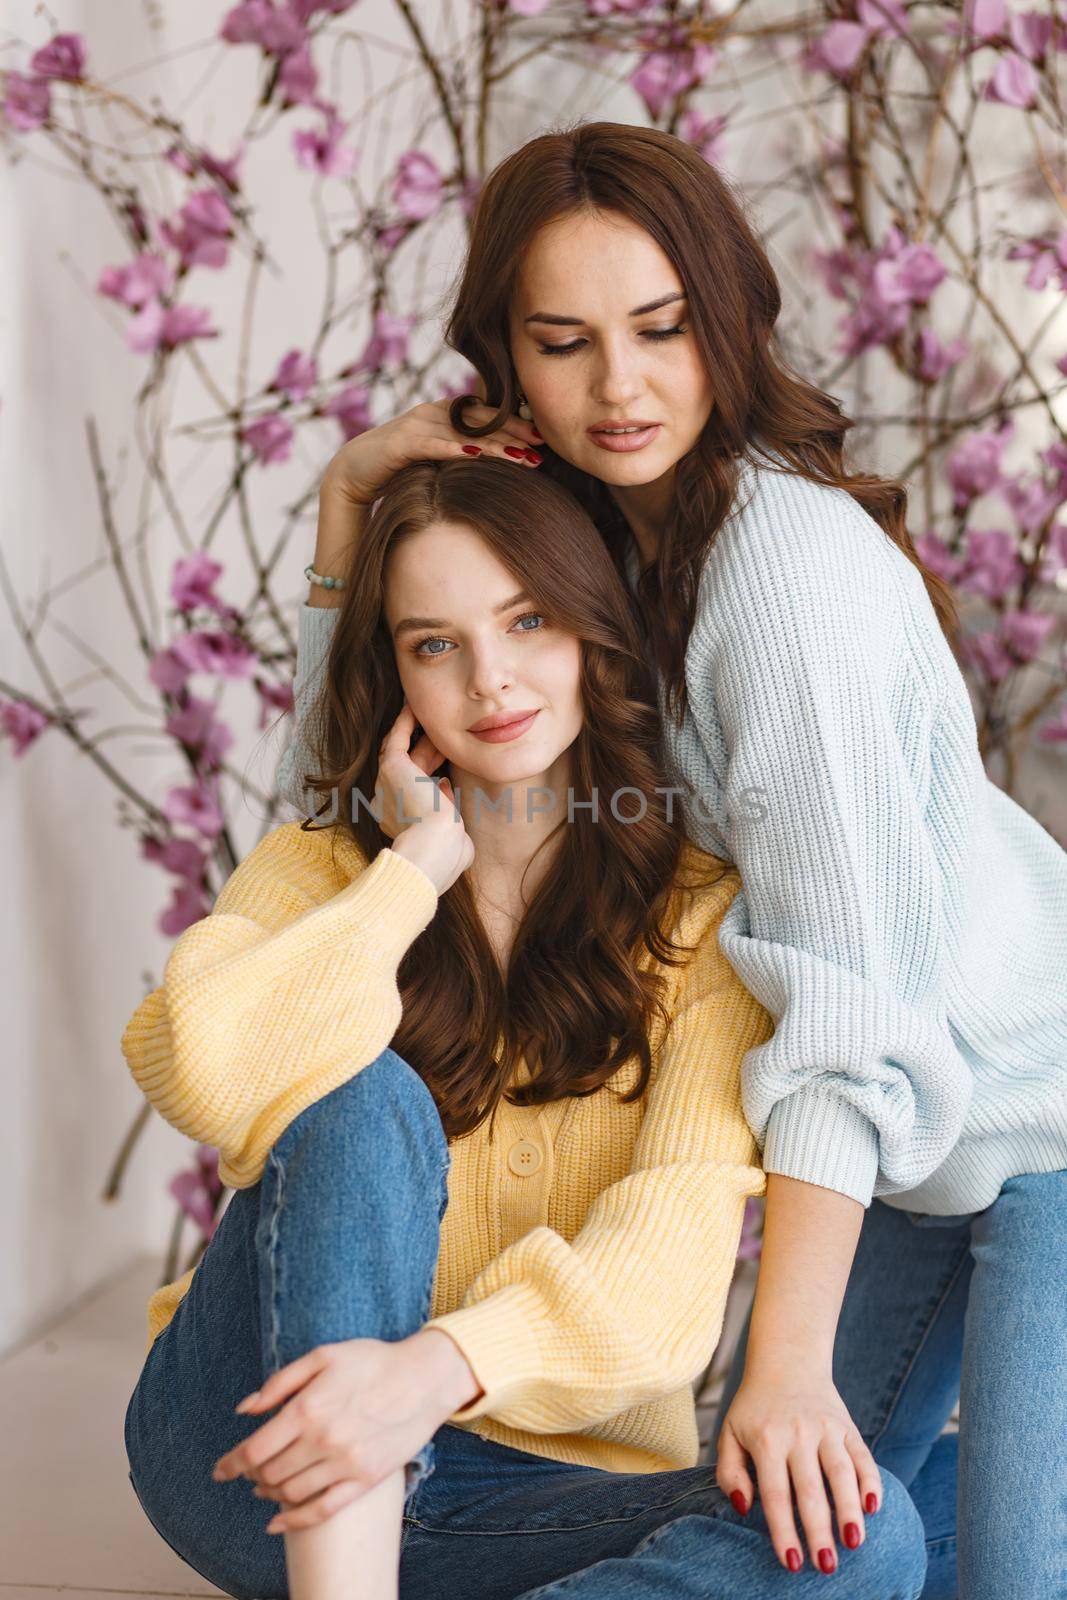 Two girls, models, have fun and smile in a photo studio. Expression of emotions by deandy